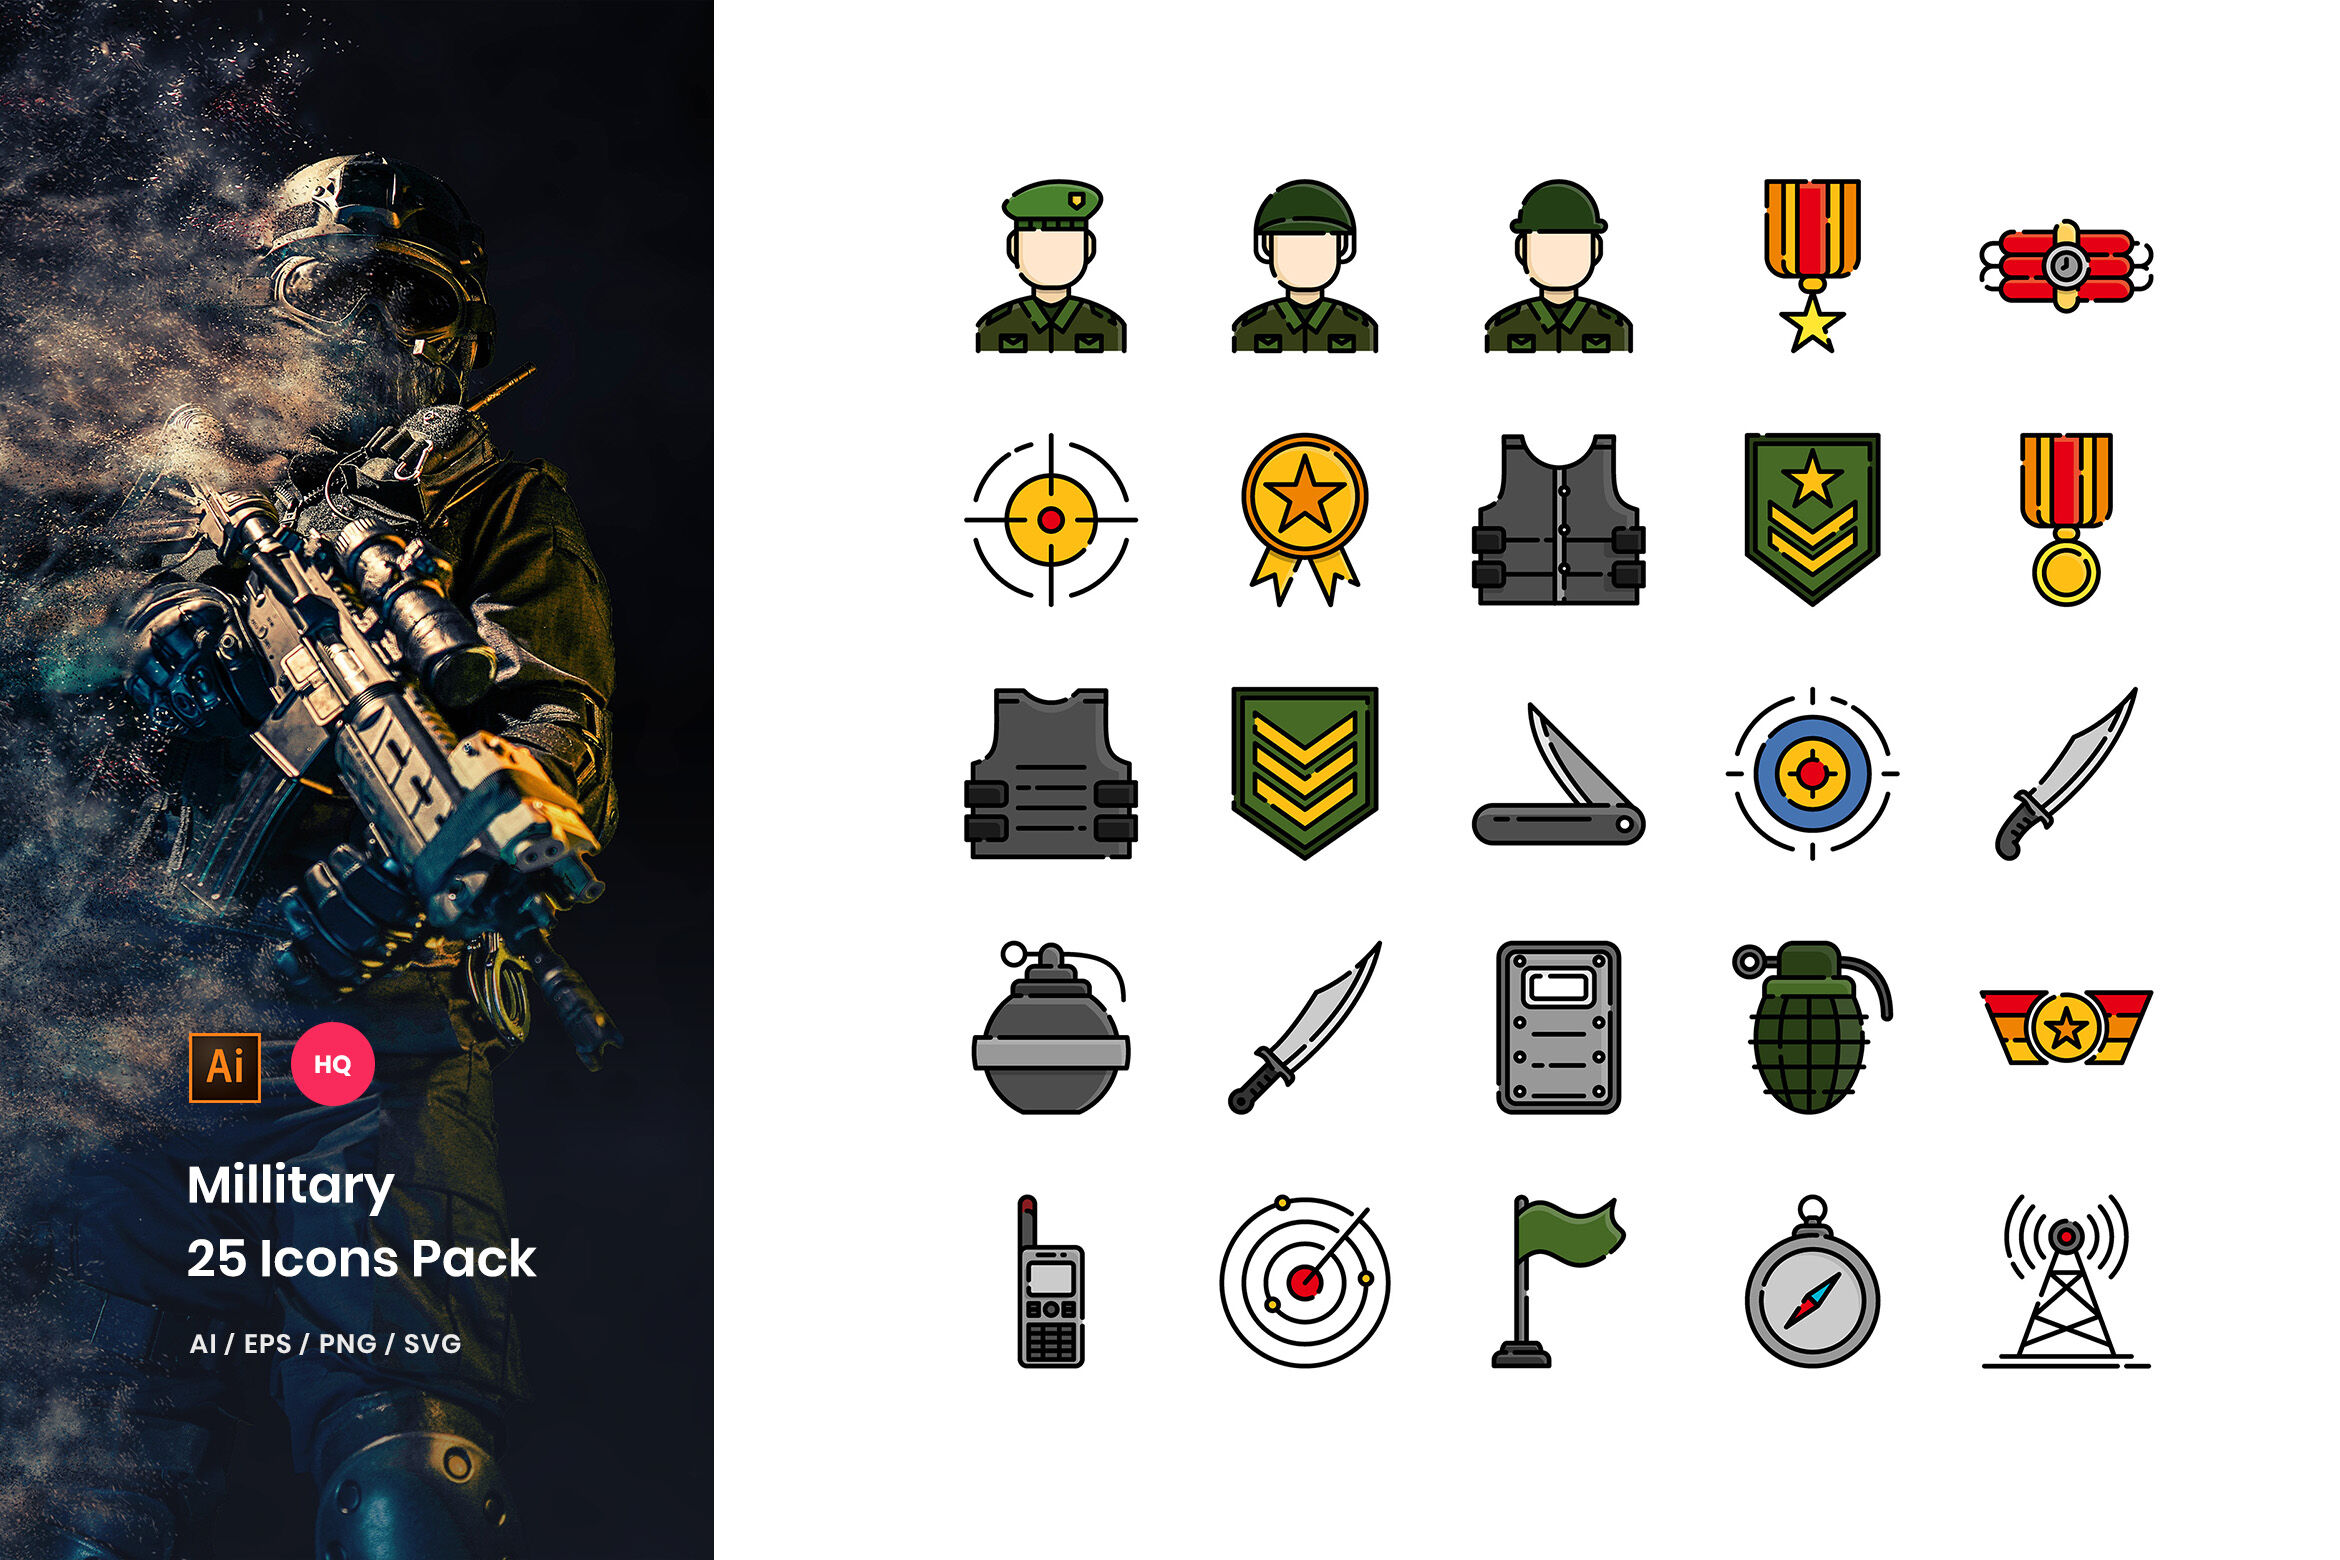 16x16 Military Icons And Symbols